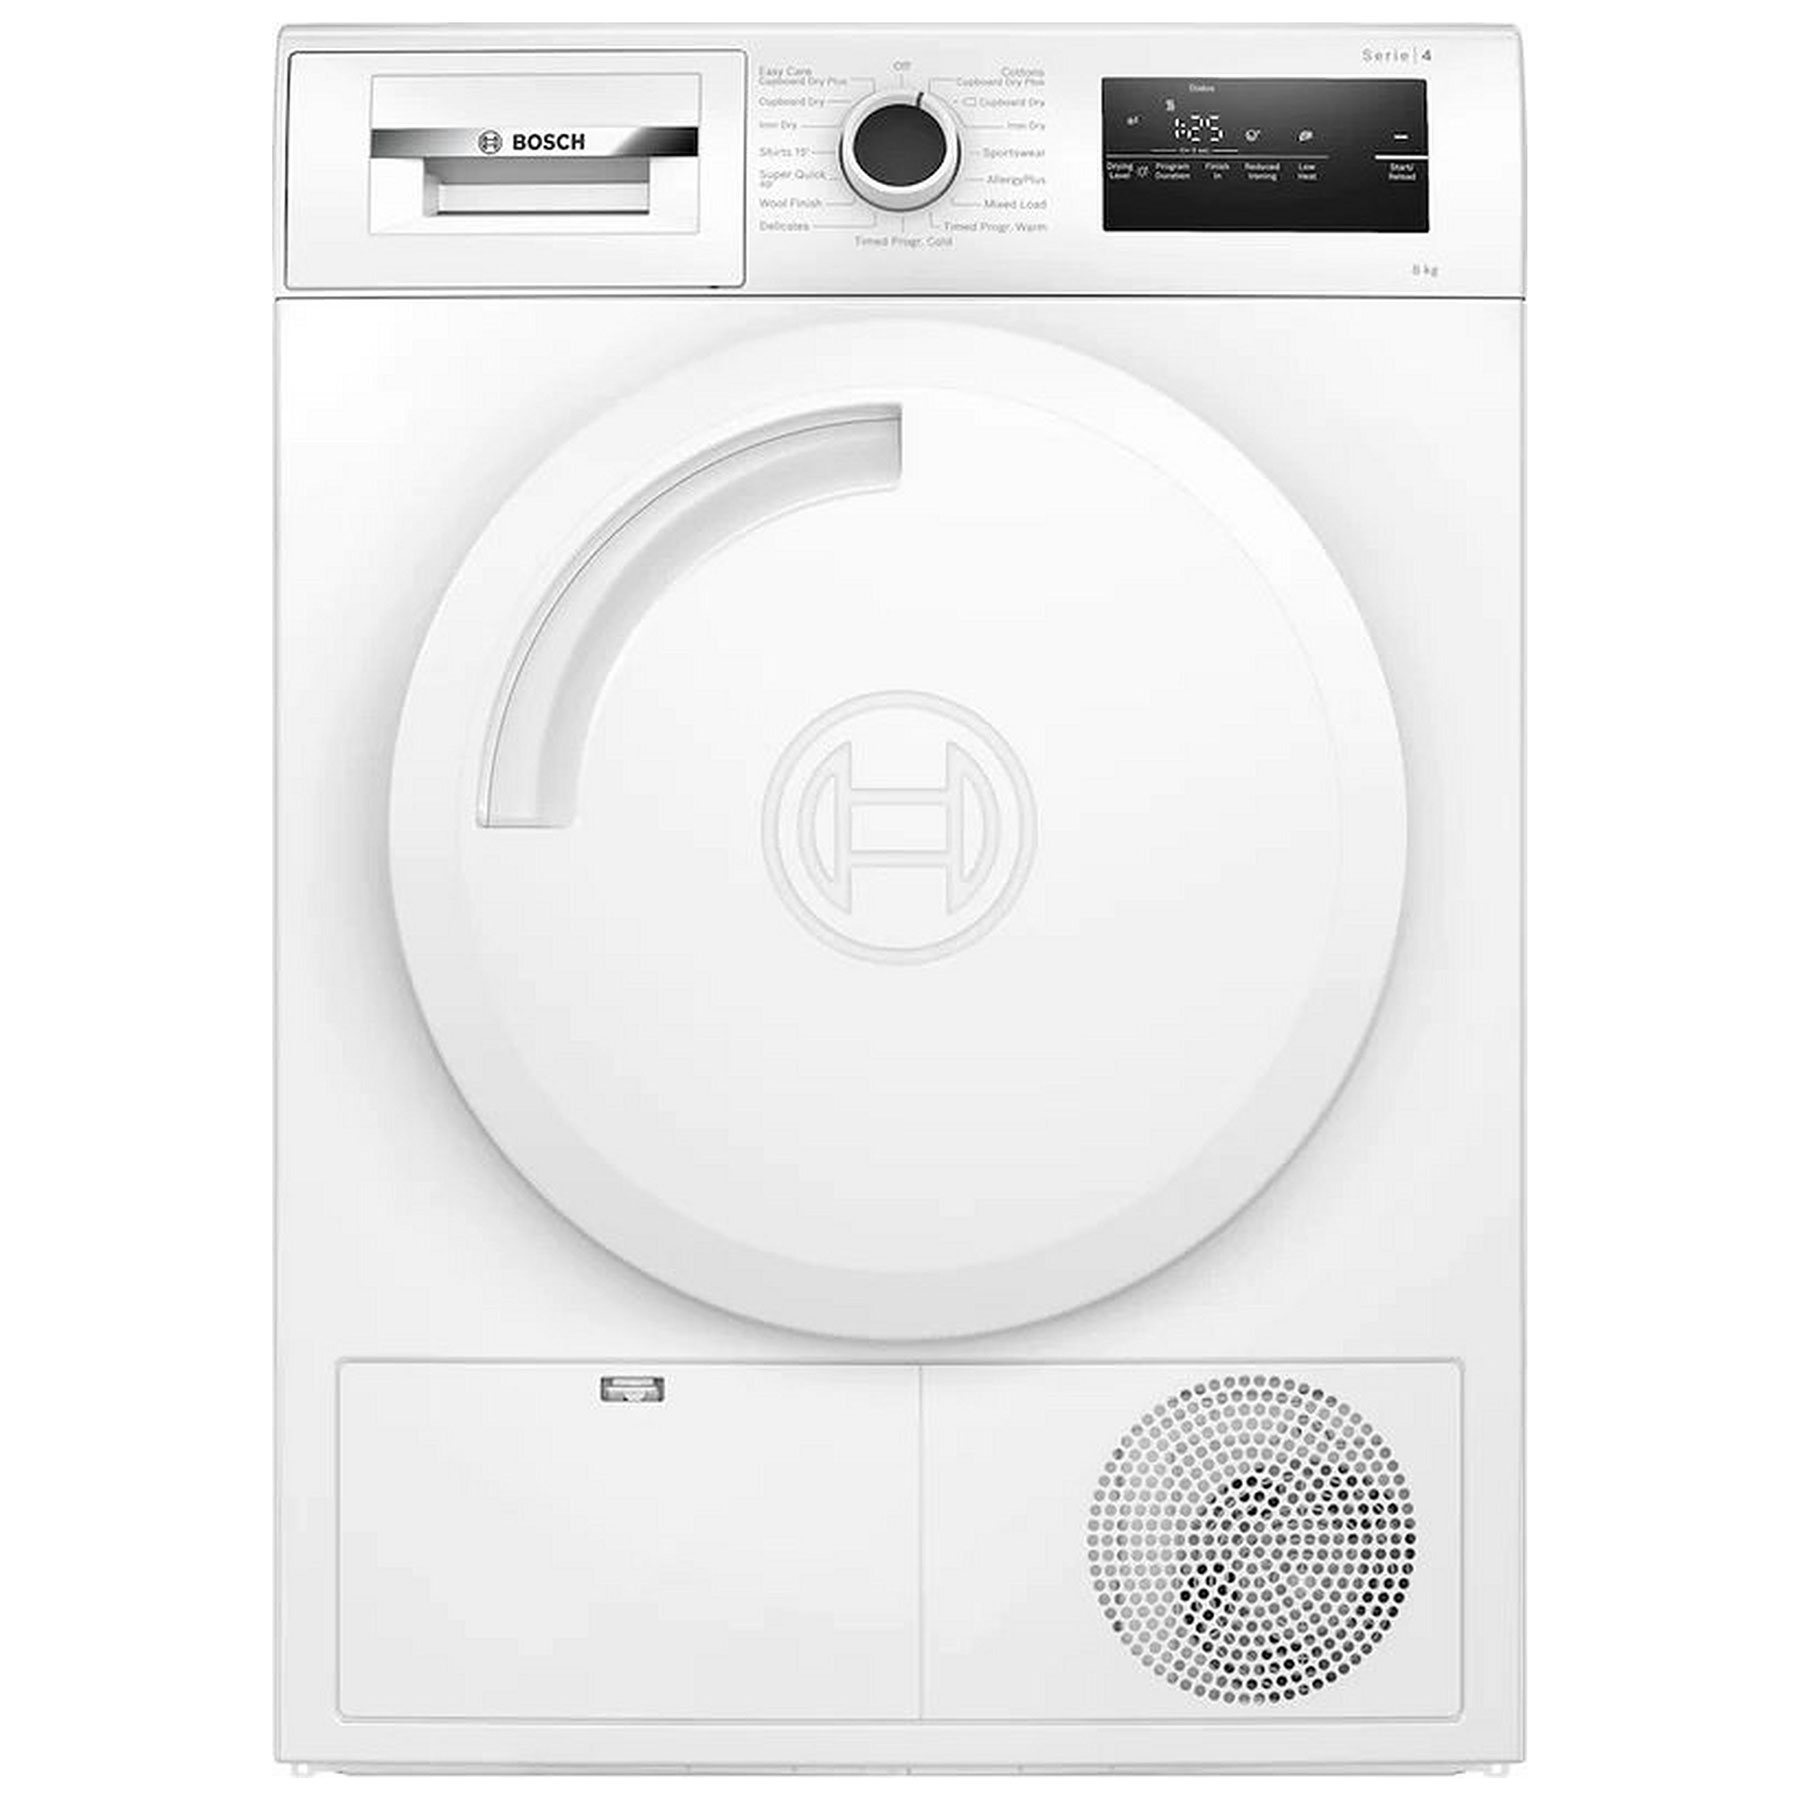 Image of Bosch WTN83202GB Series 4 8kg Condenser Dryer in White B Rated Sensor